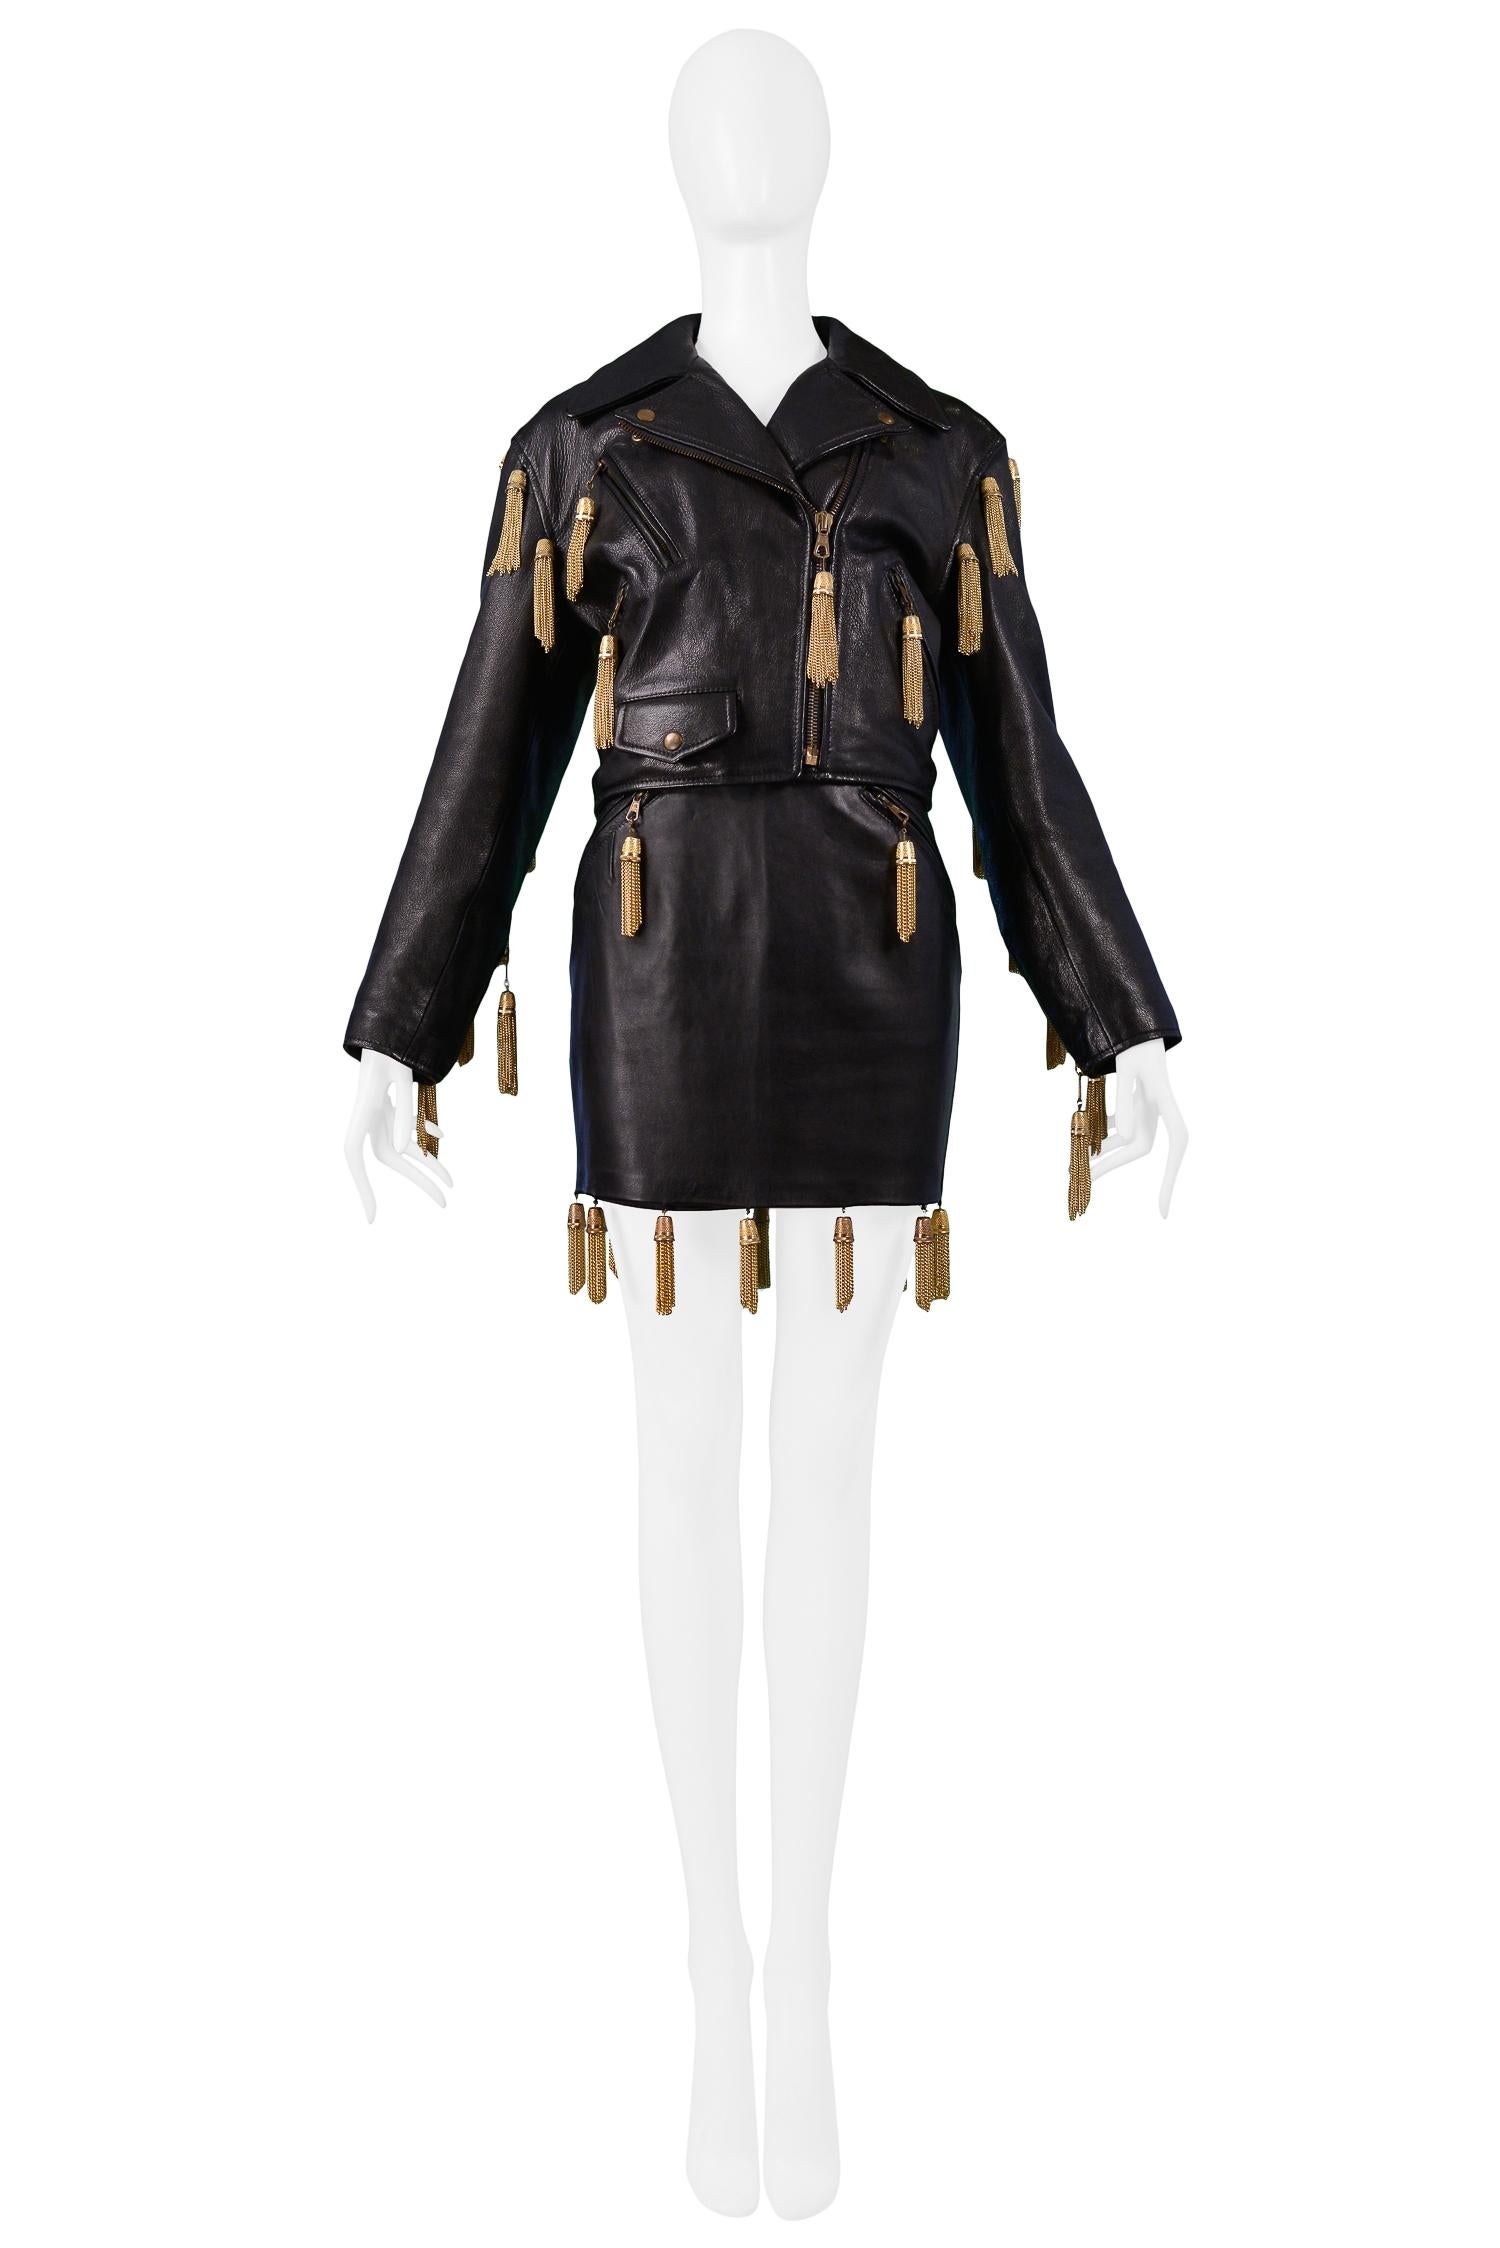 Resurrection Vintage is excited to offer a vintage Moschino by Franco Moschino black leather motorcycle jacket and skirt. Both pieces feature gold thimbles with gold chains. Like new condition. Circa 1989.

Moschino
Size: 42/42
Measurements: Jacket,